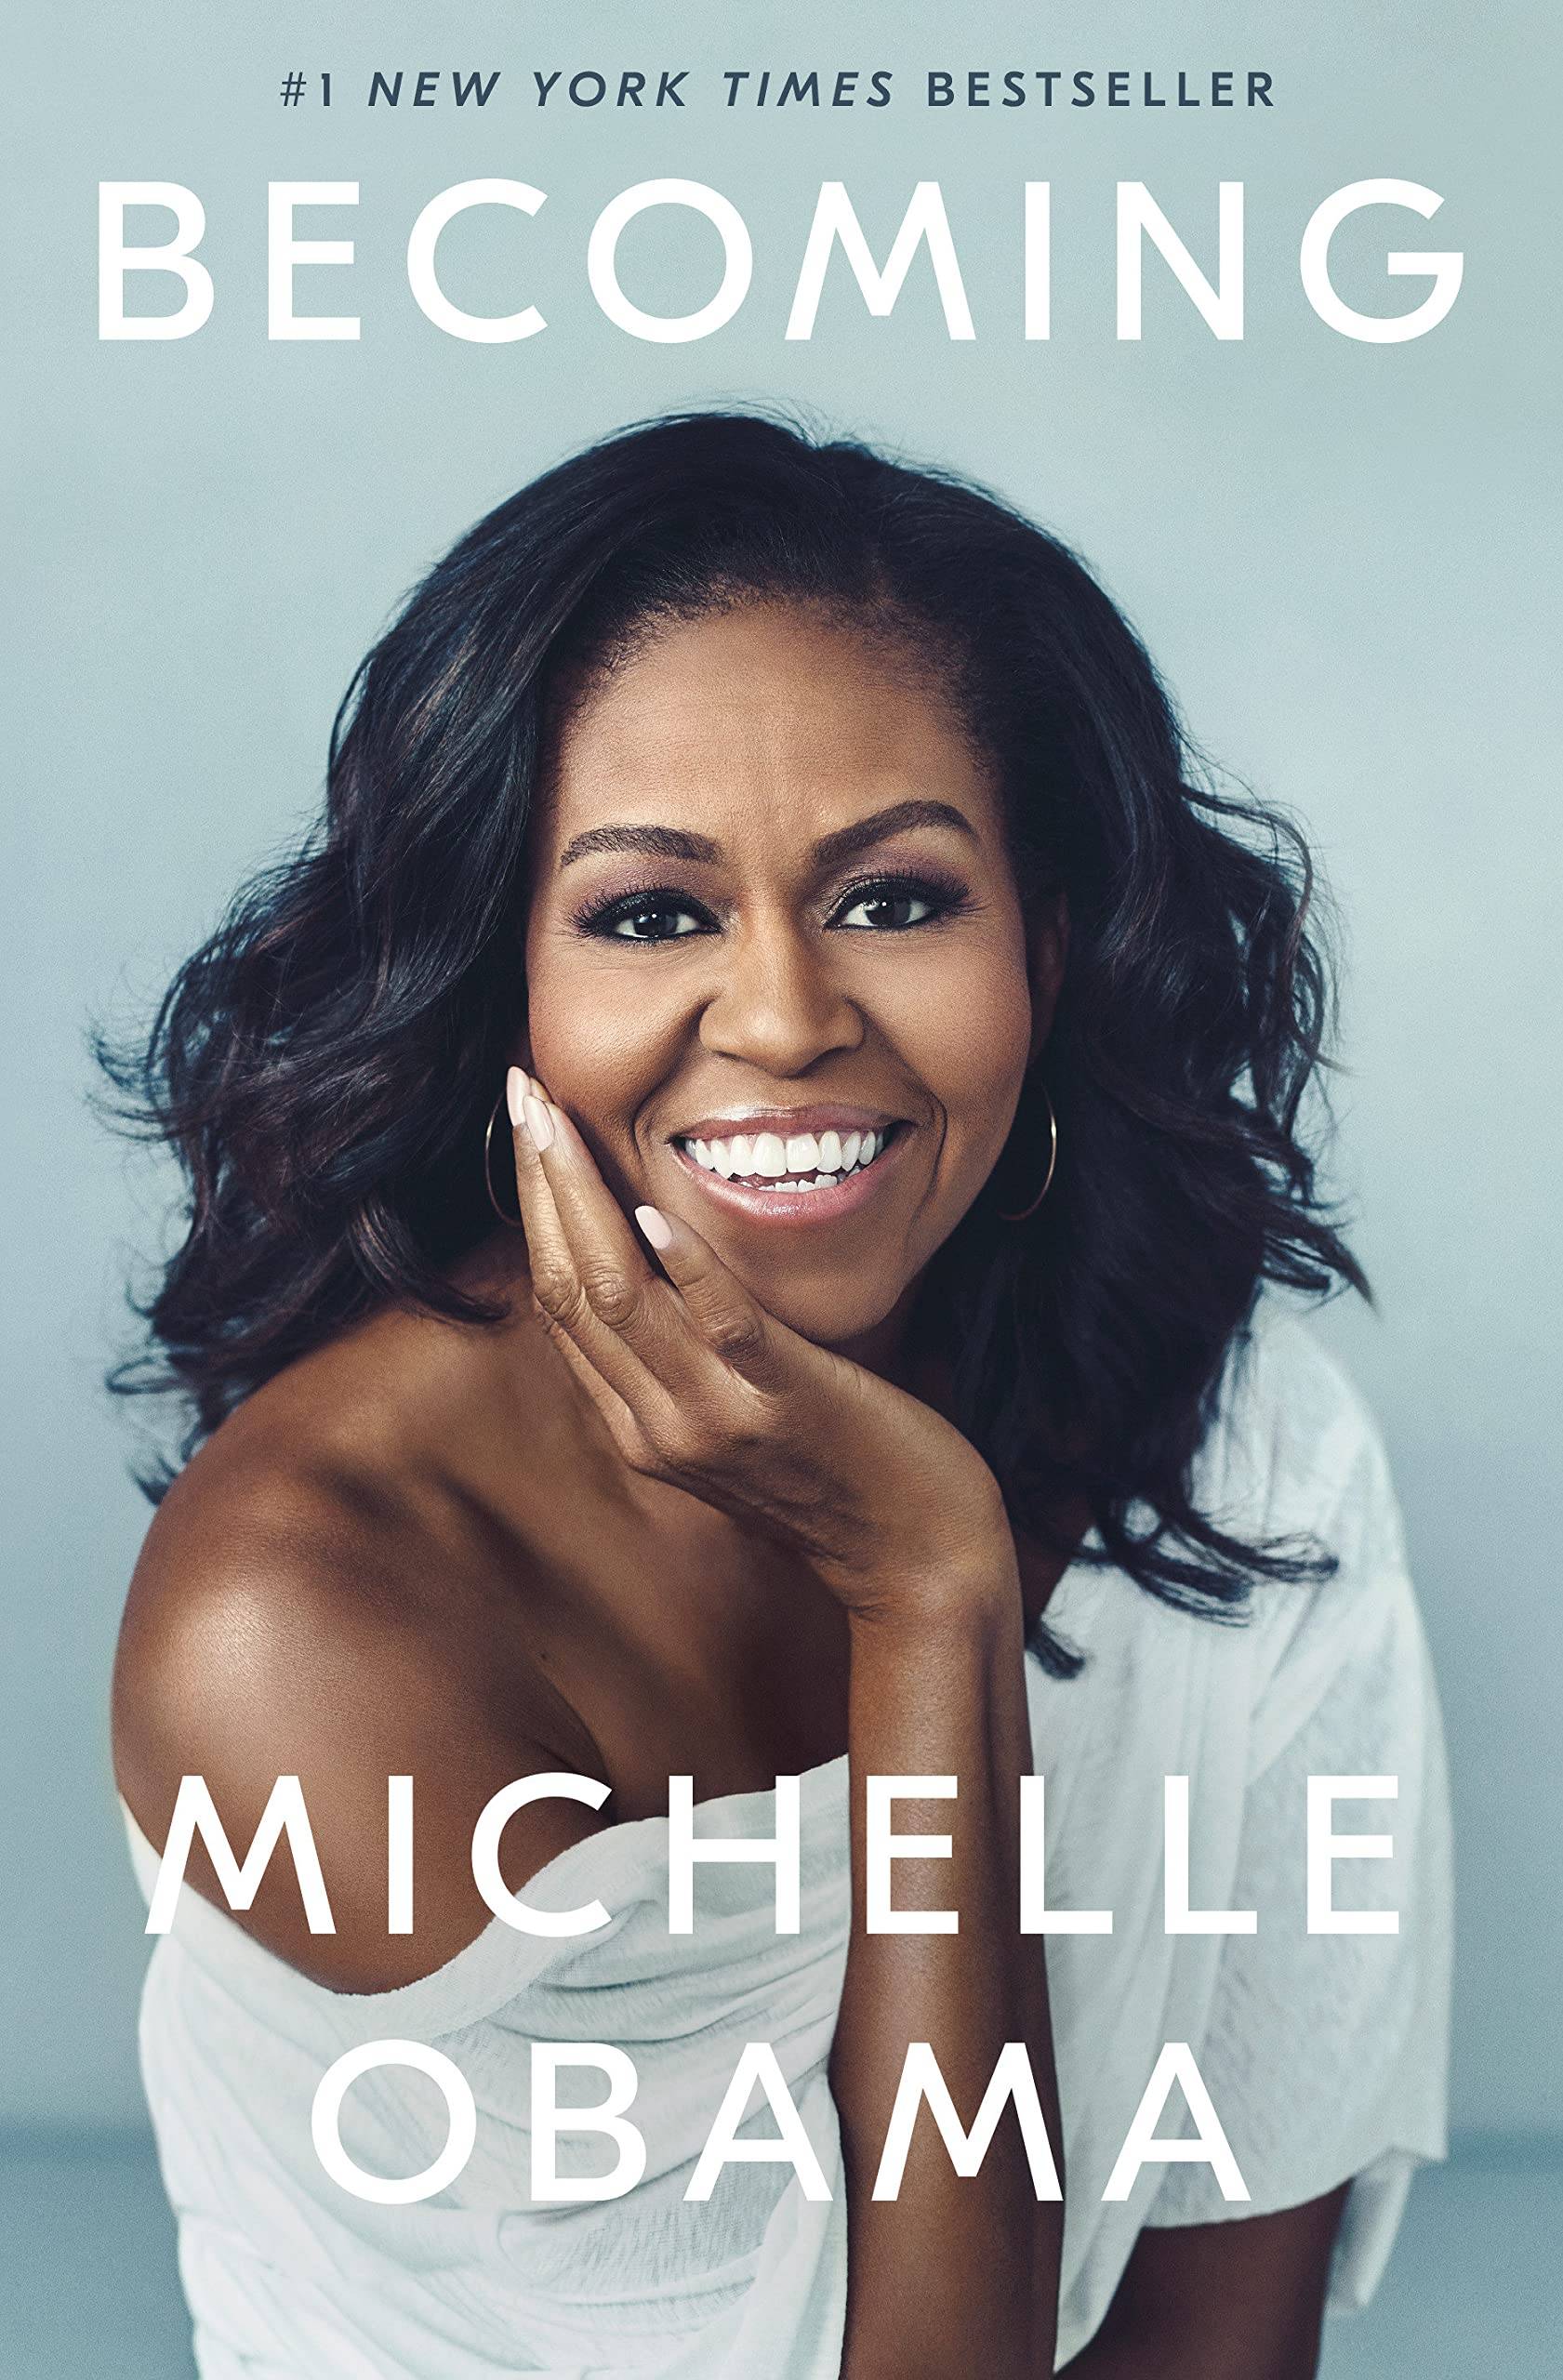 Book cover featuring the photo of a smiling Michelle Obama